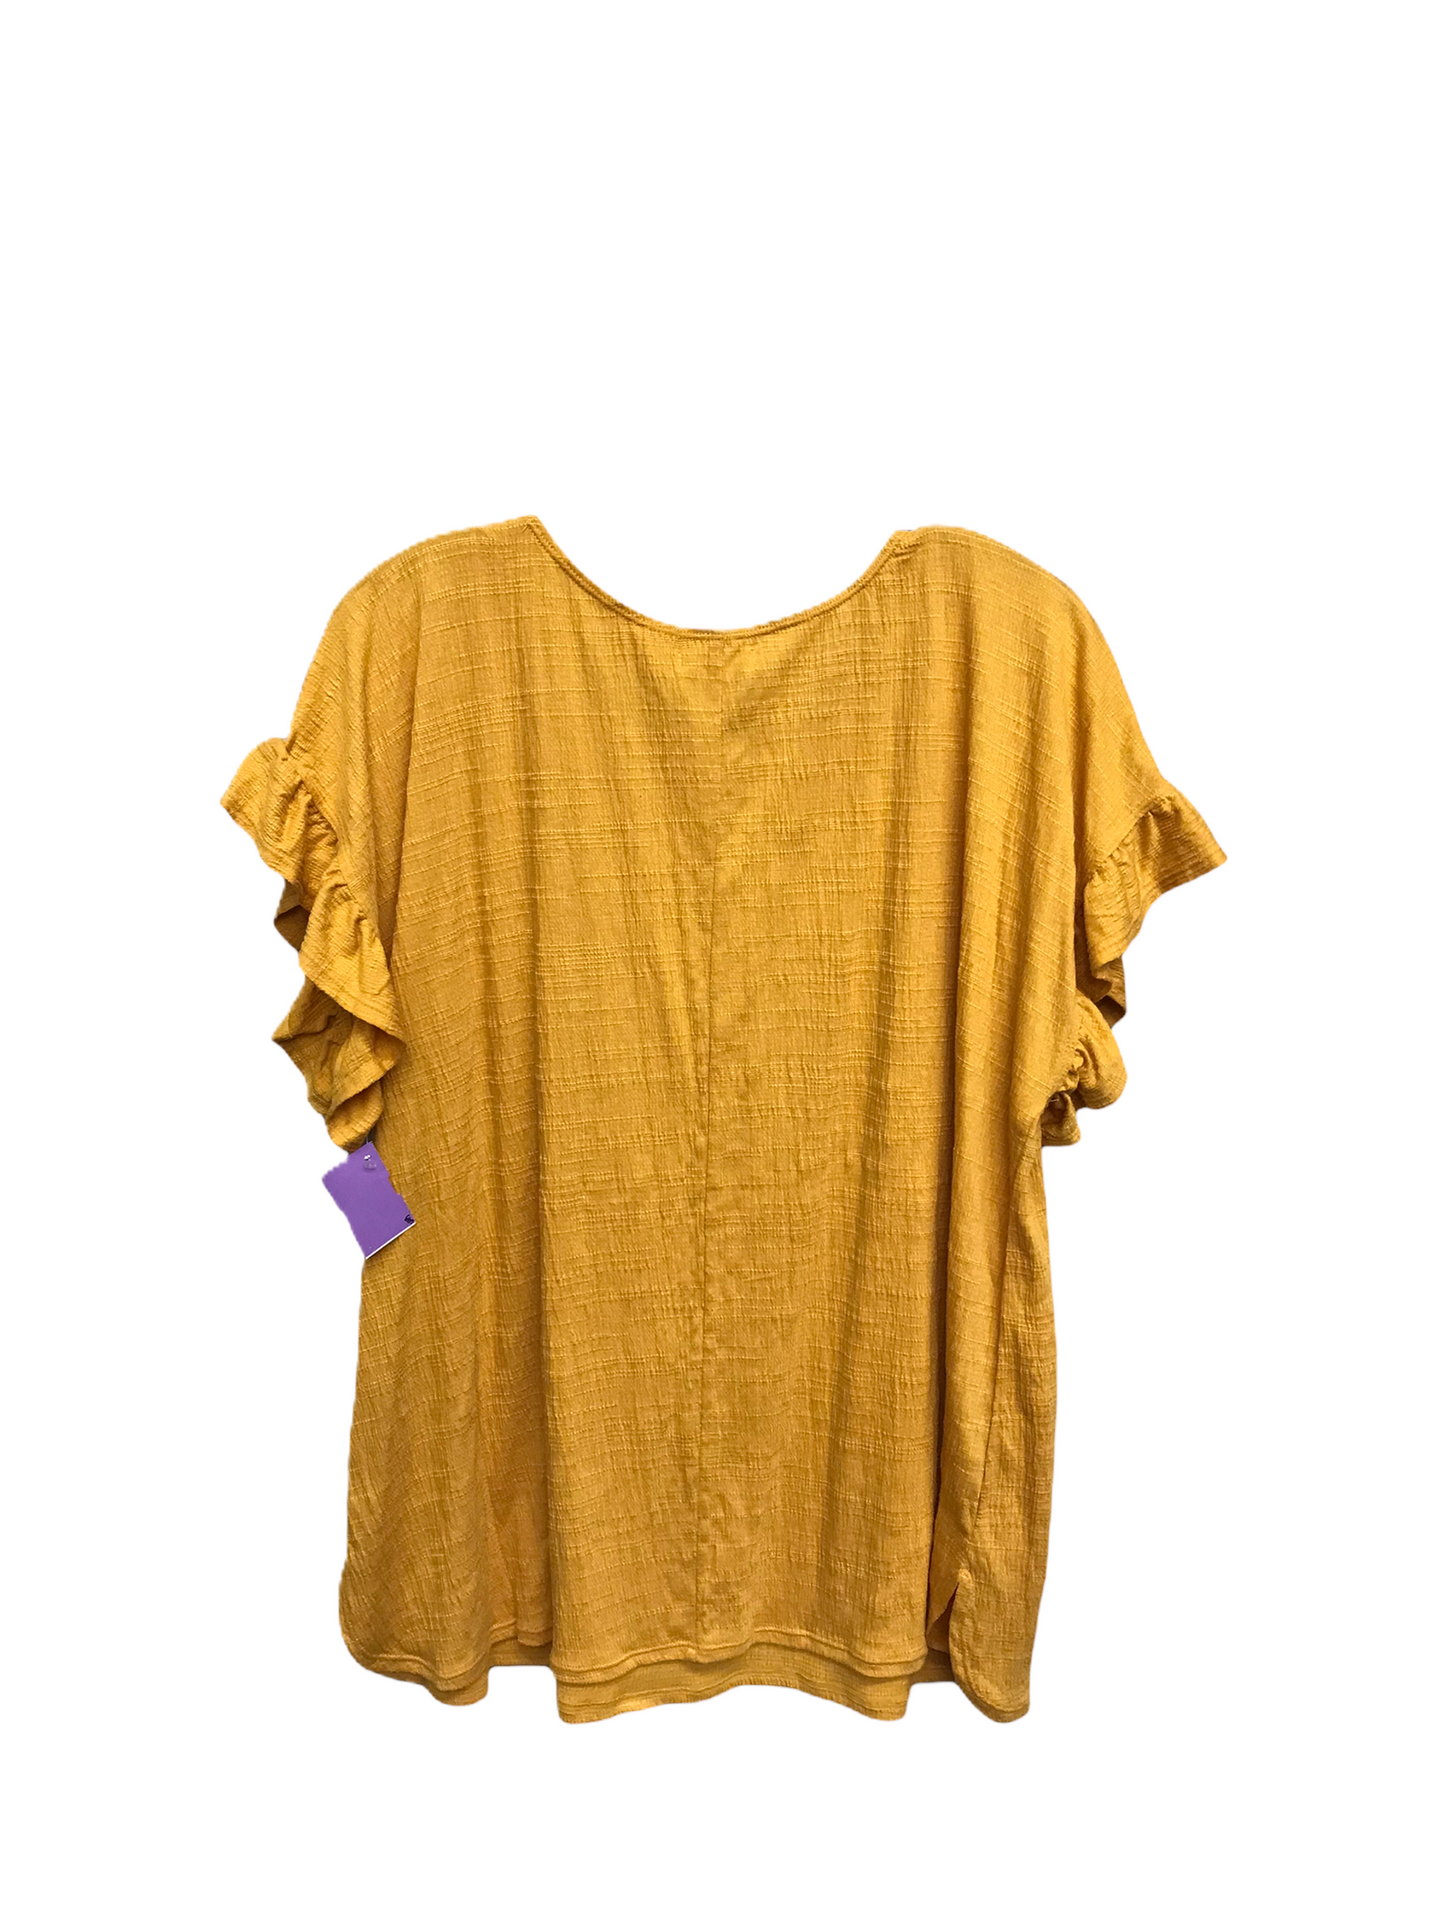 Yellow Top Short Sleeve By Max Studio, Size: 2x